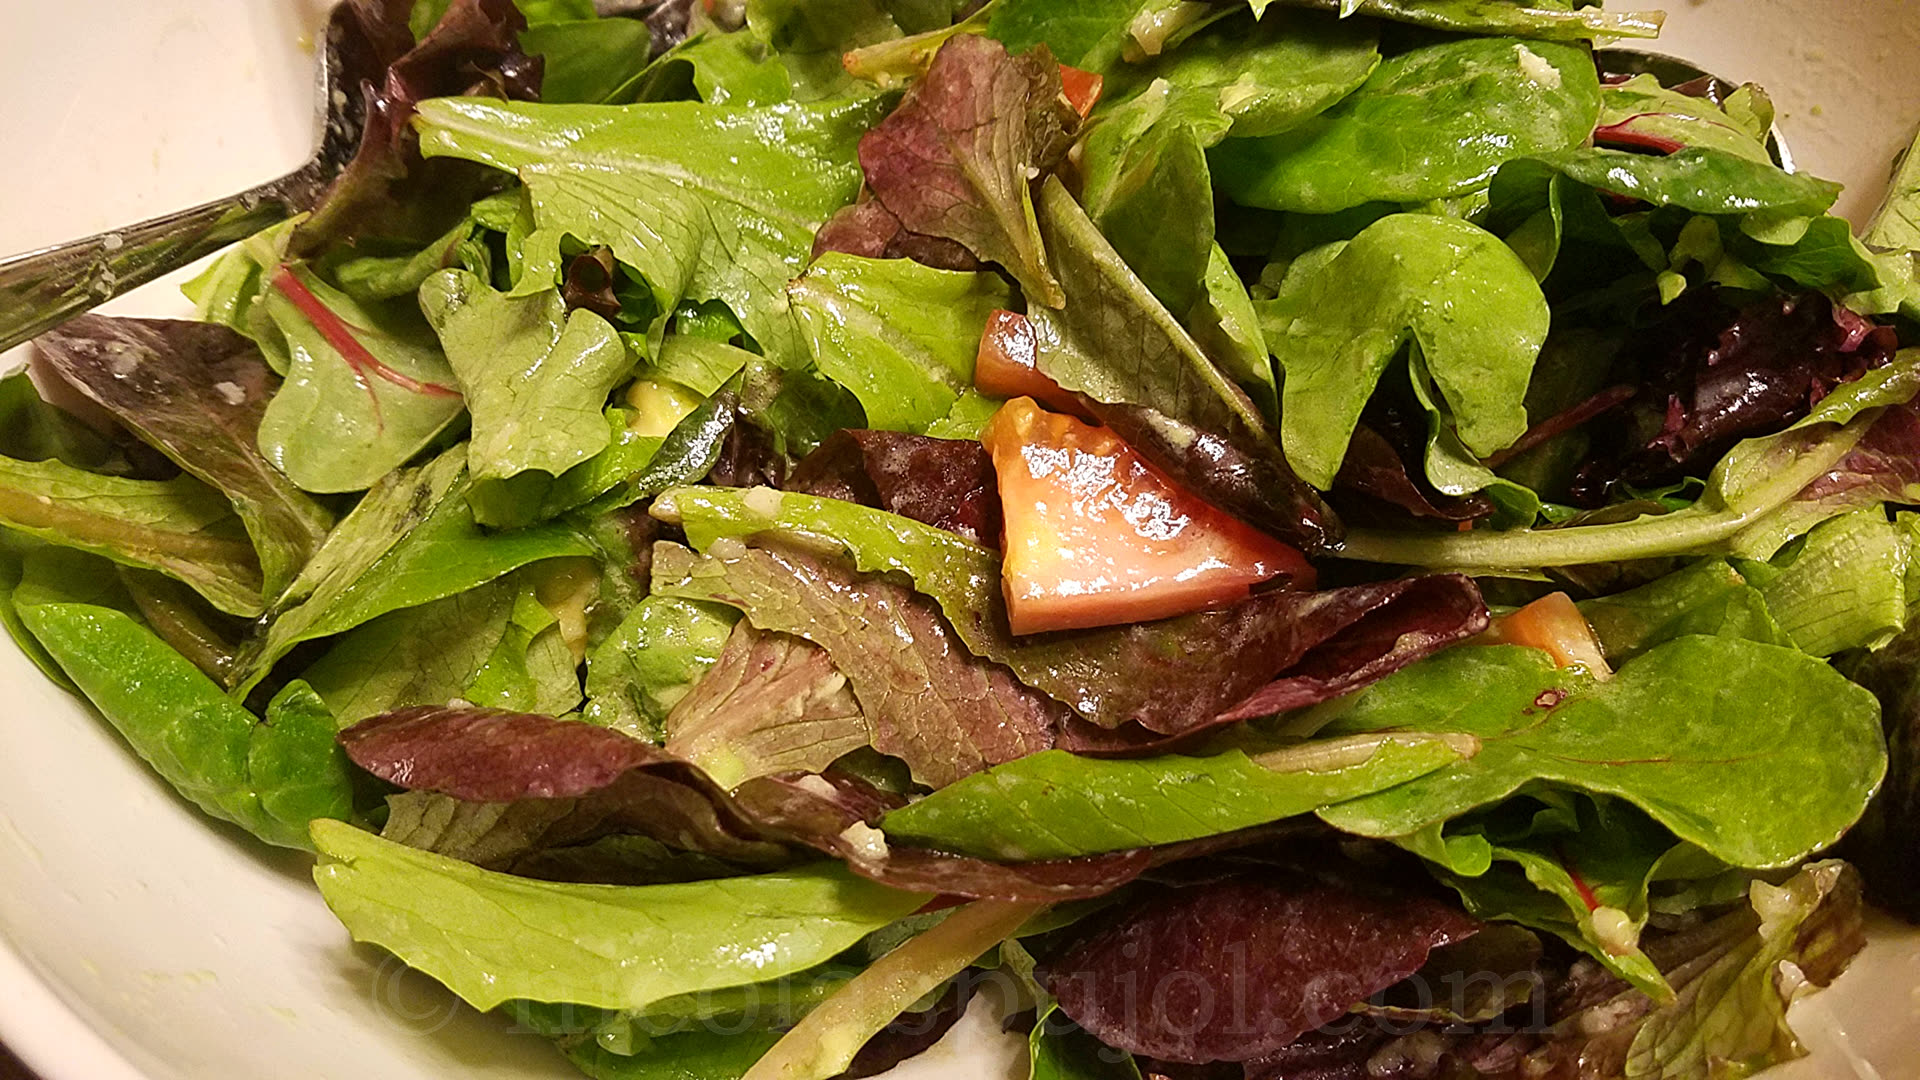 Simple lettuce salad with French lemon dressing